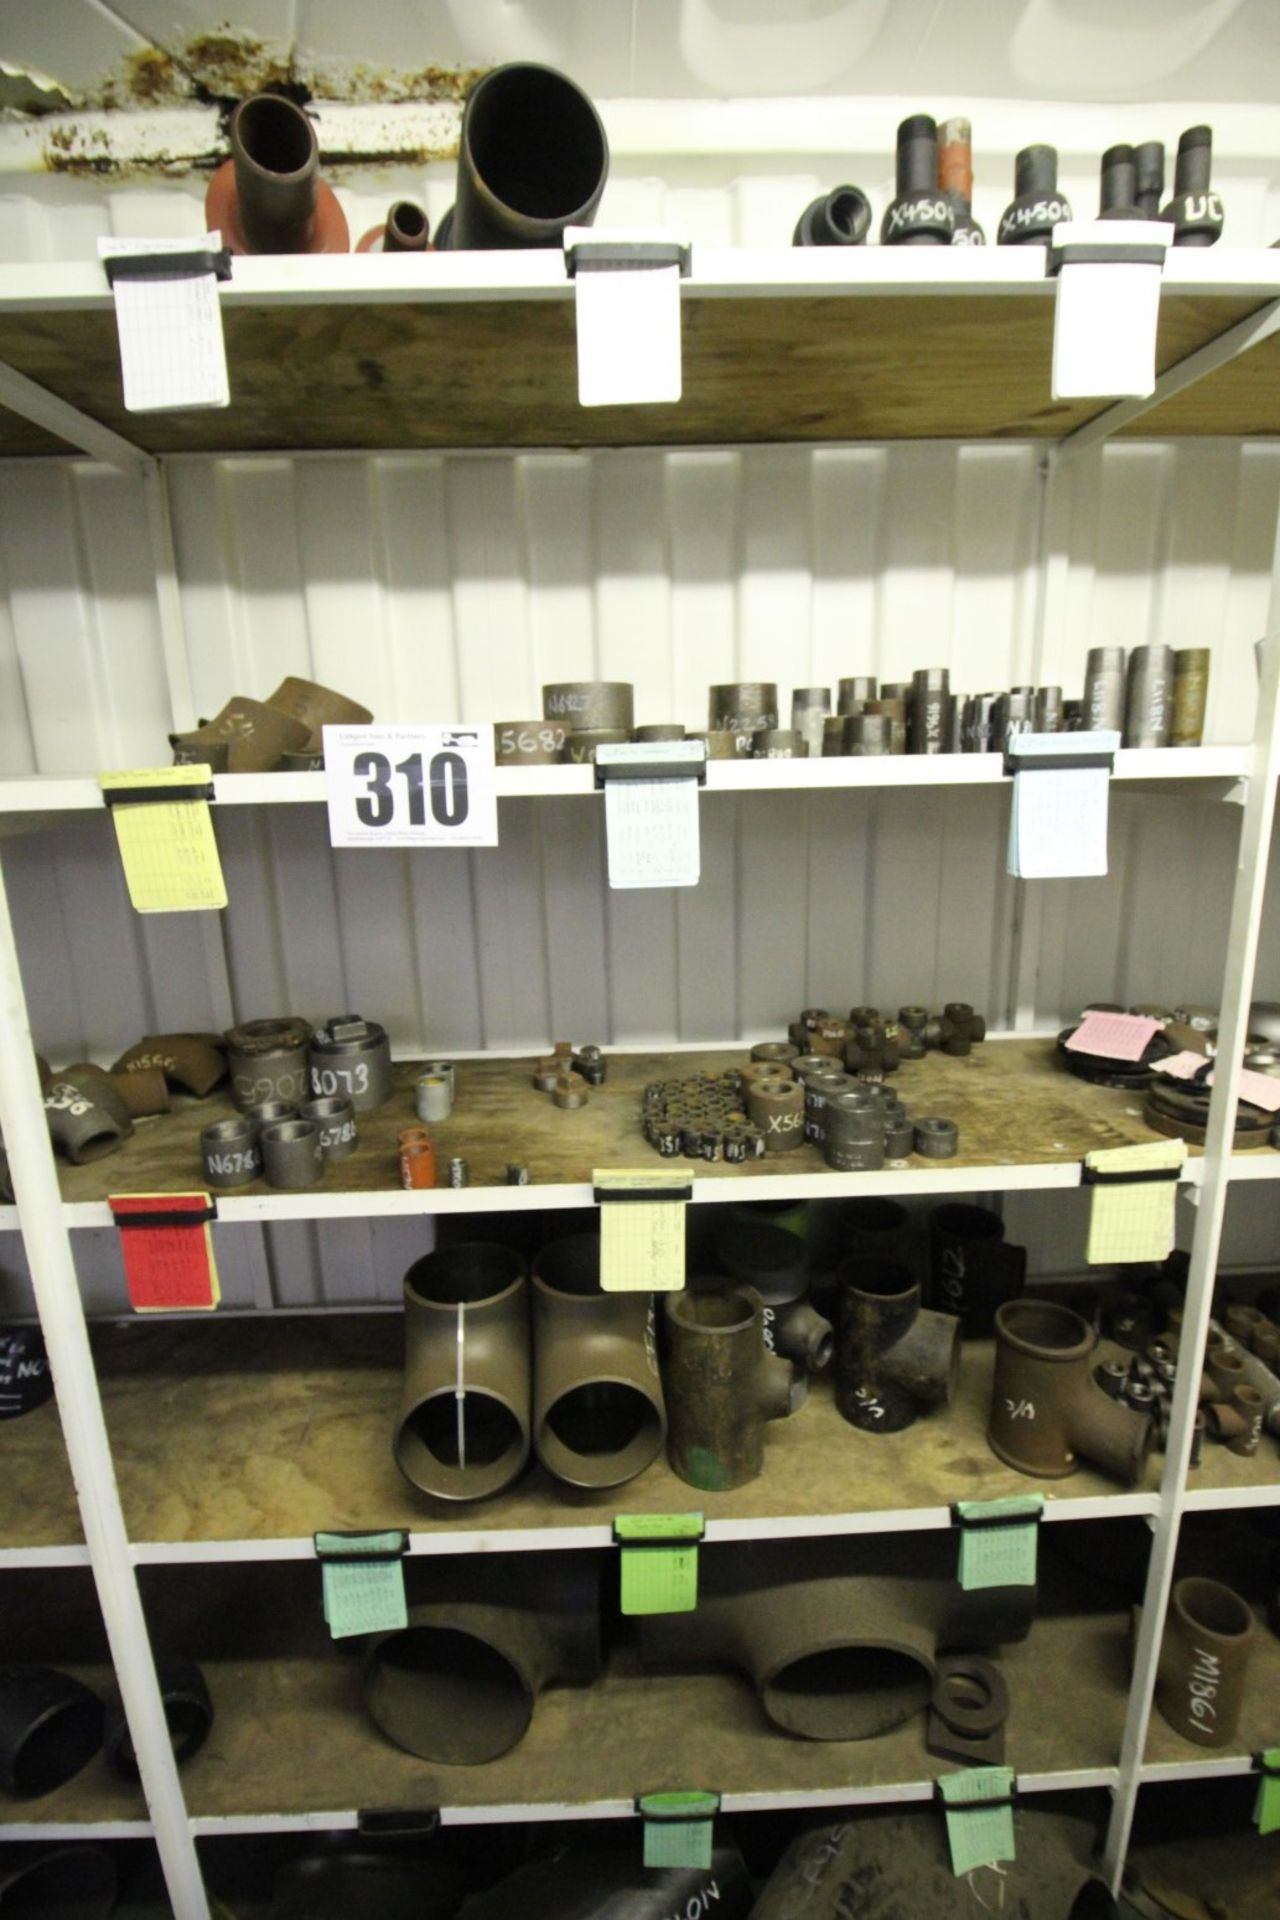 CONTENTS OF 5 SHELVES OF SECTION OF RACK PLUS FLOOR OF FERROUS PIPE FLANGES